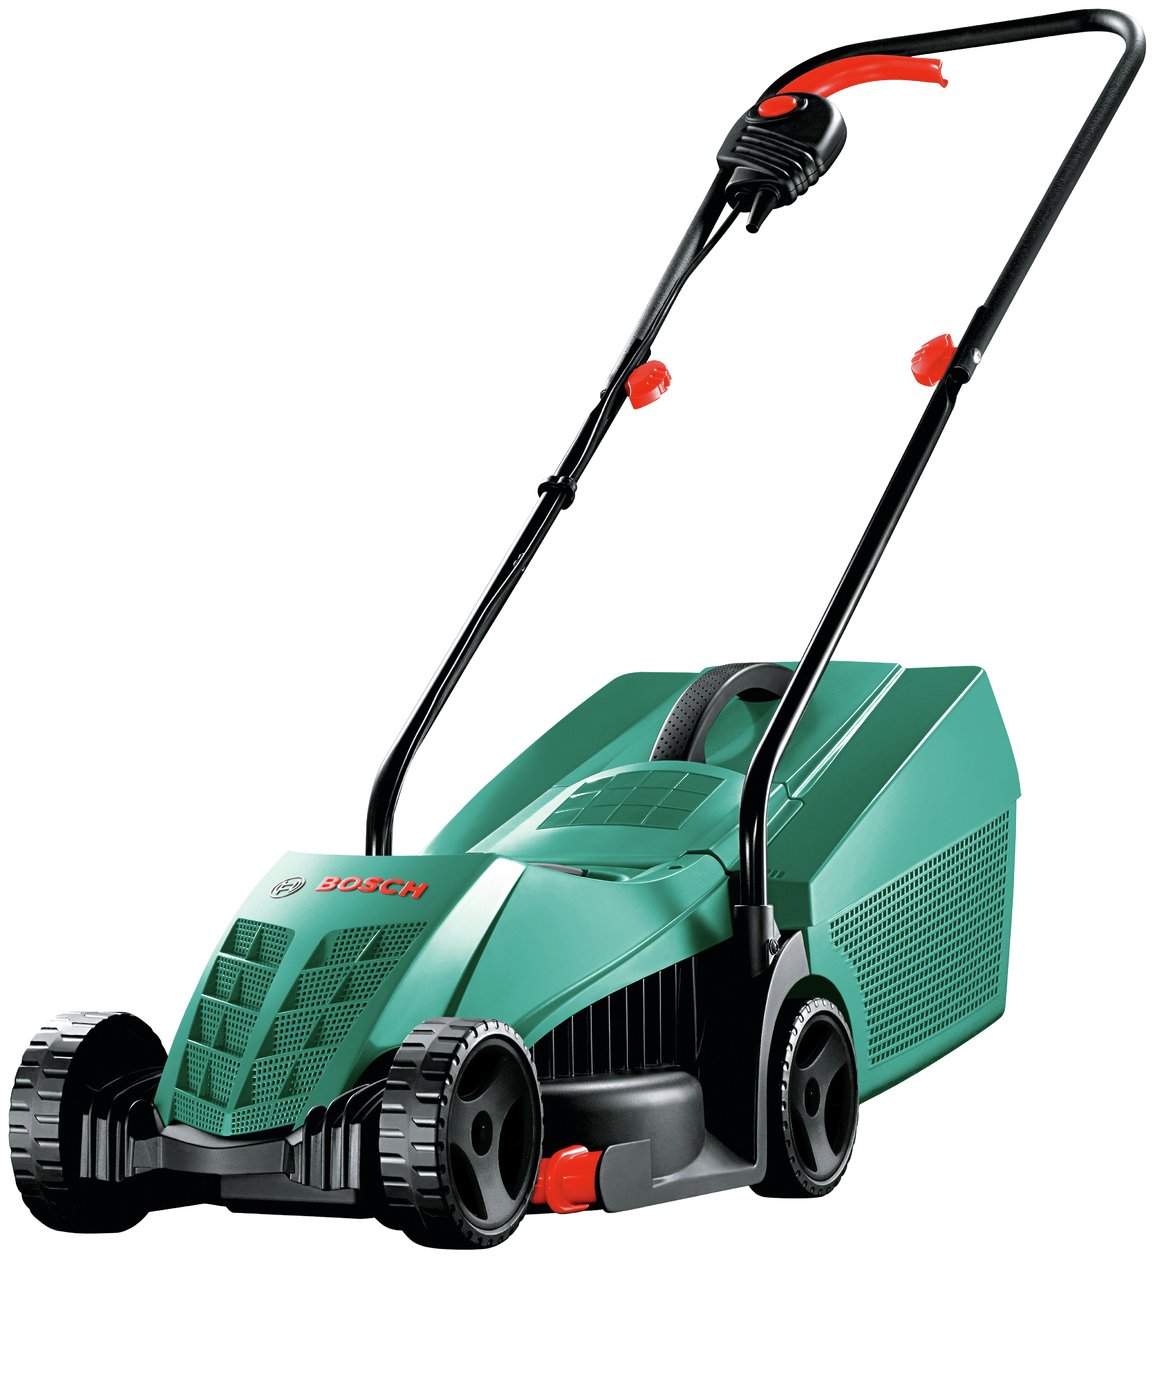 Save Over 14.00: Bosch 32cm Corded Rotary Lawnmower - 1200W